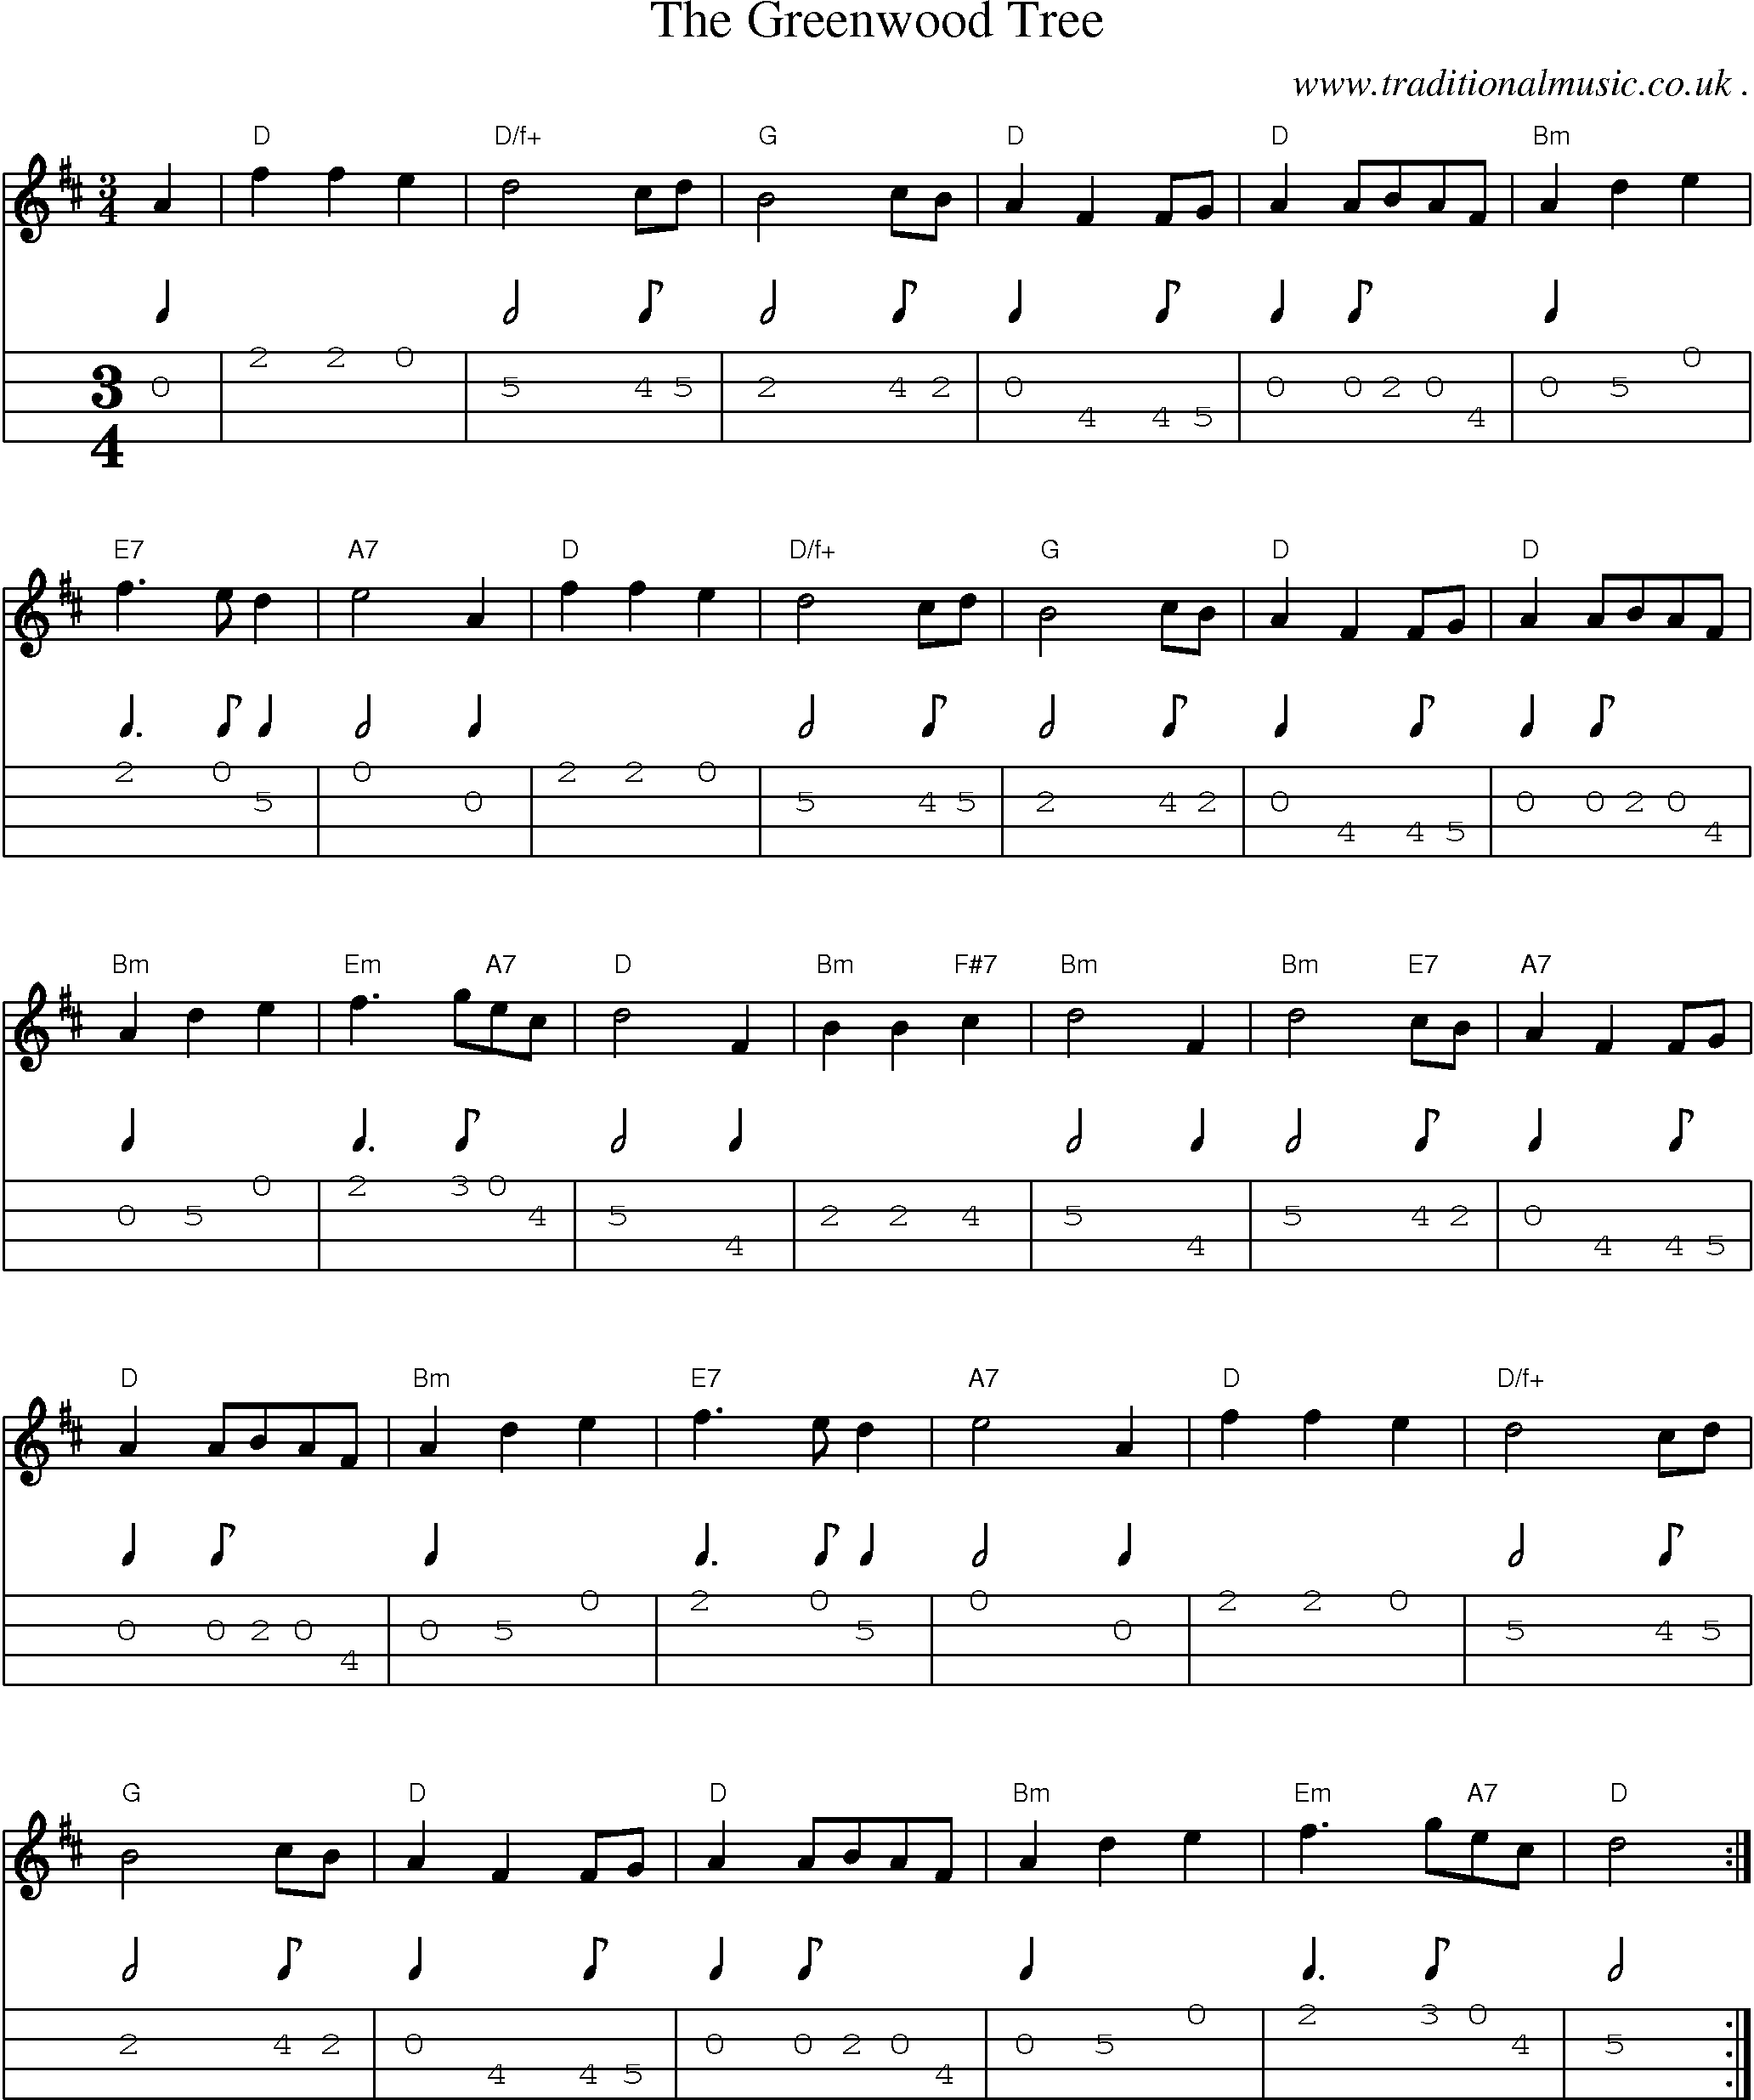 Sheet-Music and Mandolin Tabs for The Greenwood Tree